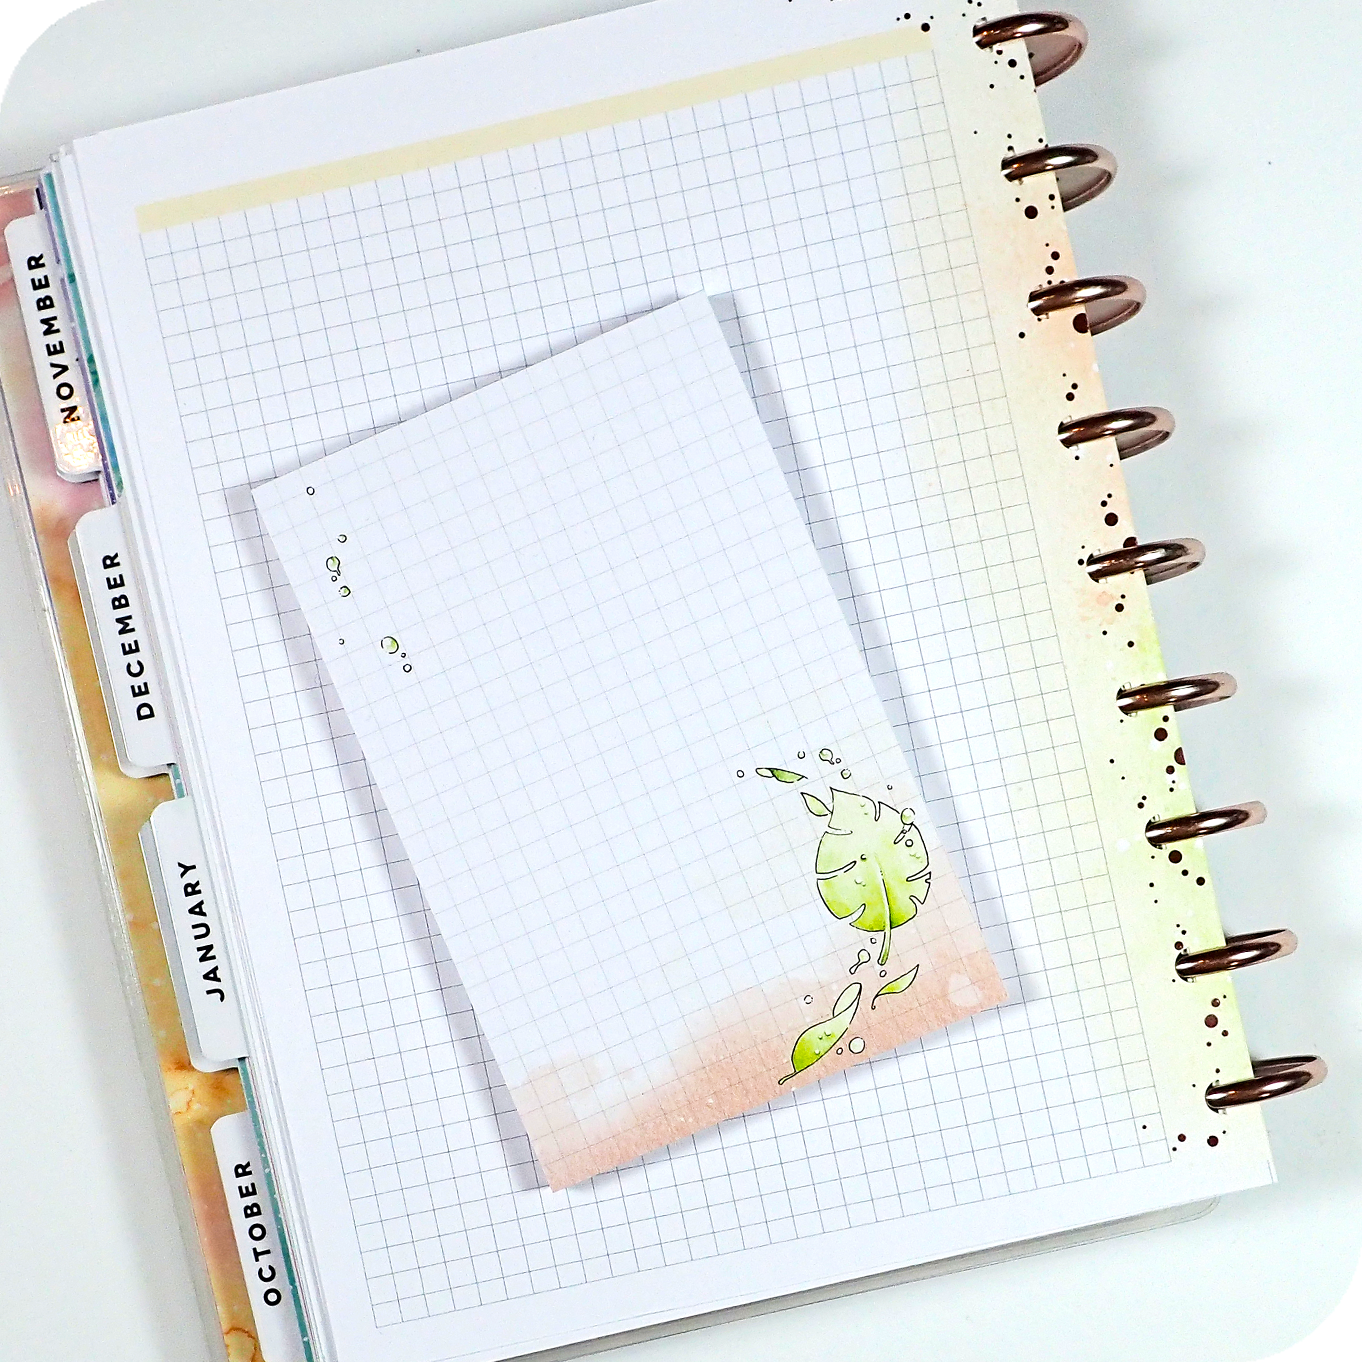 Off The Clock - Pocket sized Notepad